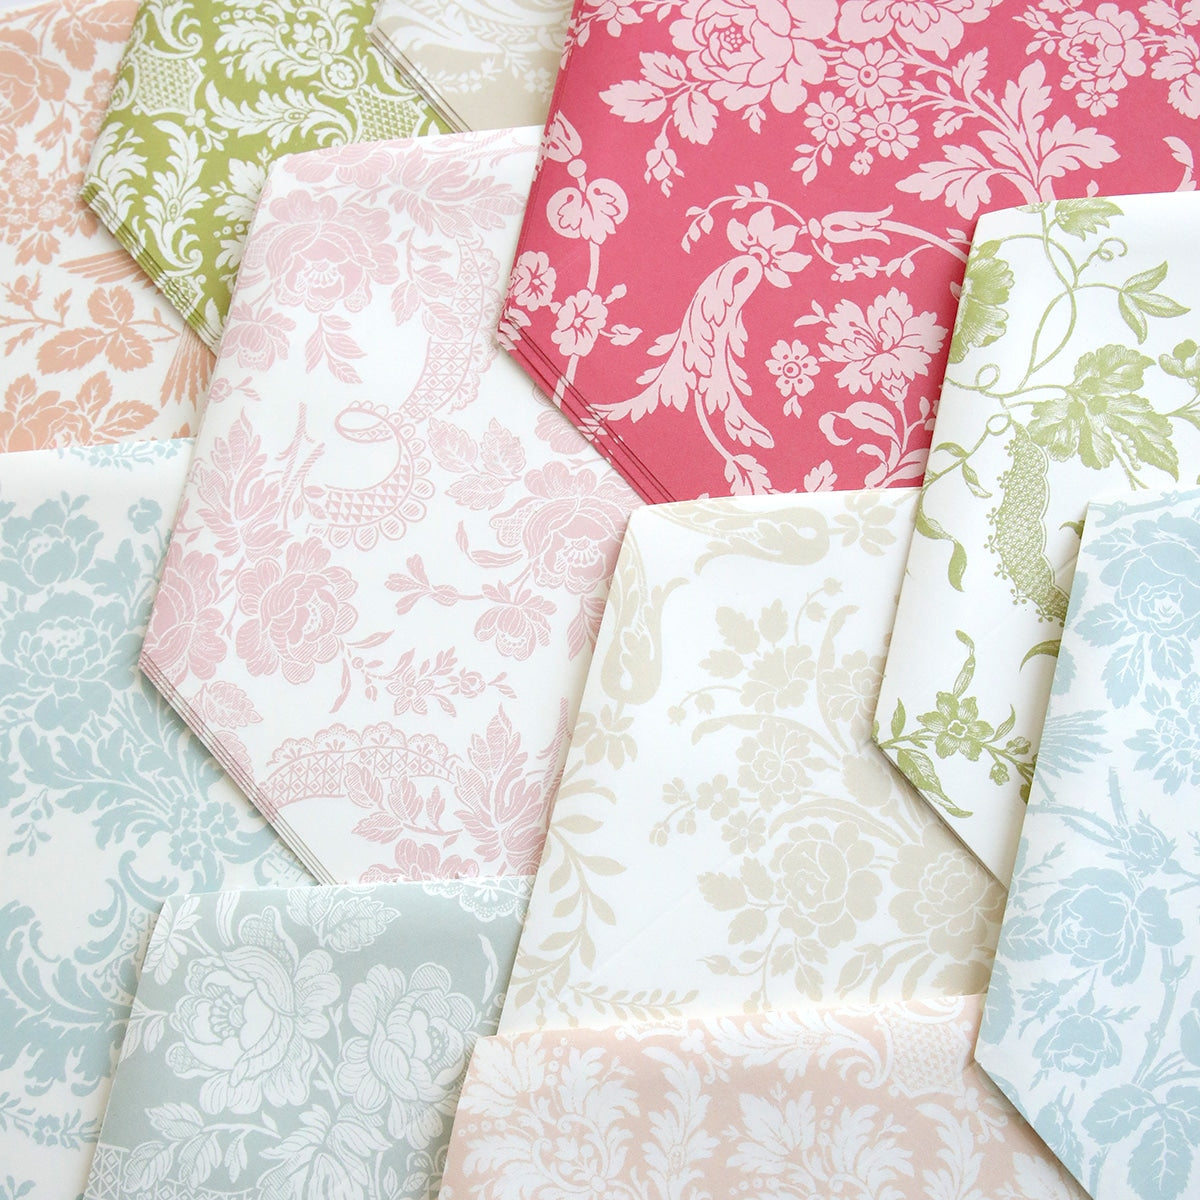 A bunch of Damask Envelope Liners fabrics.